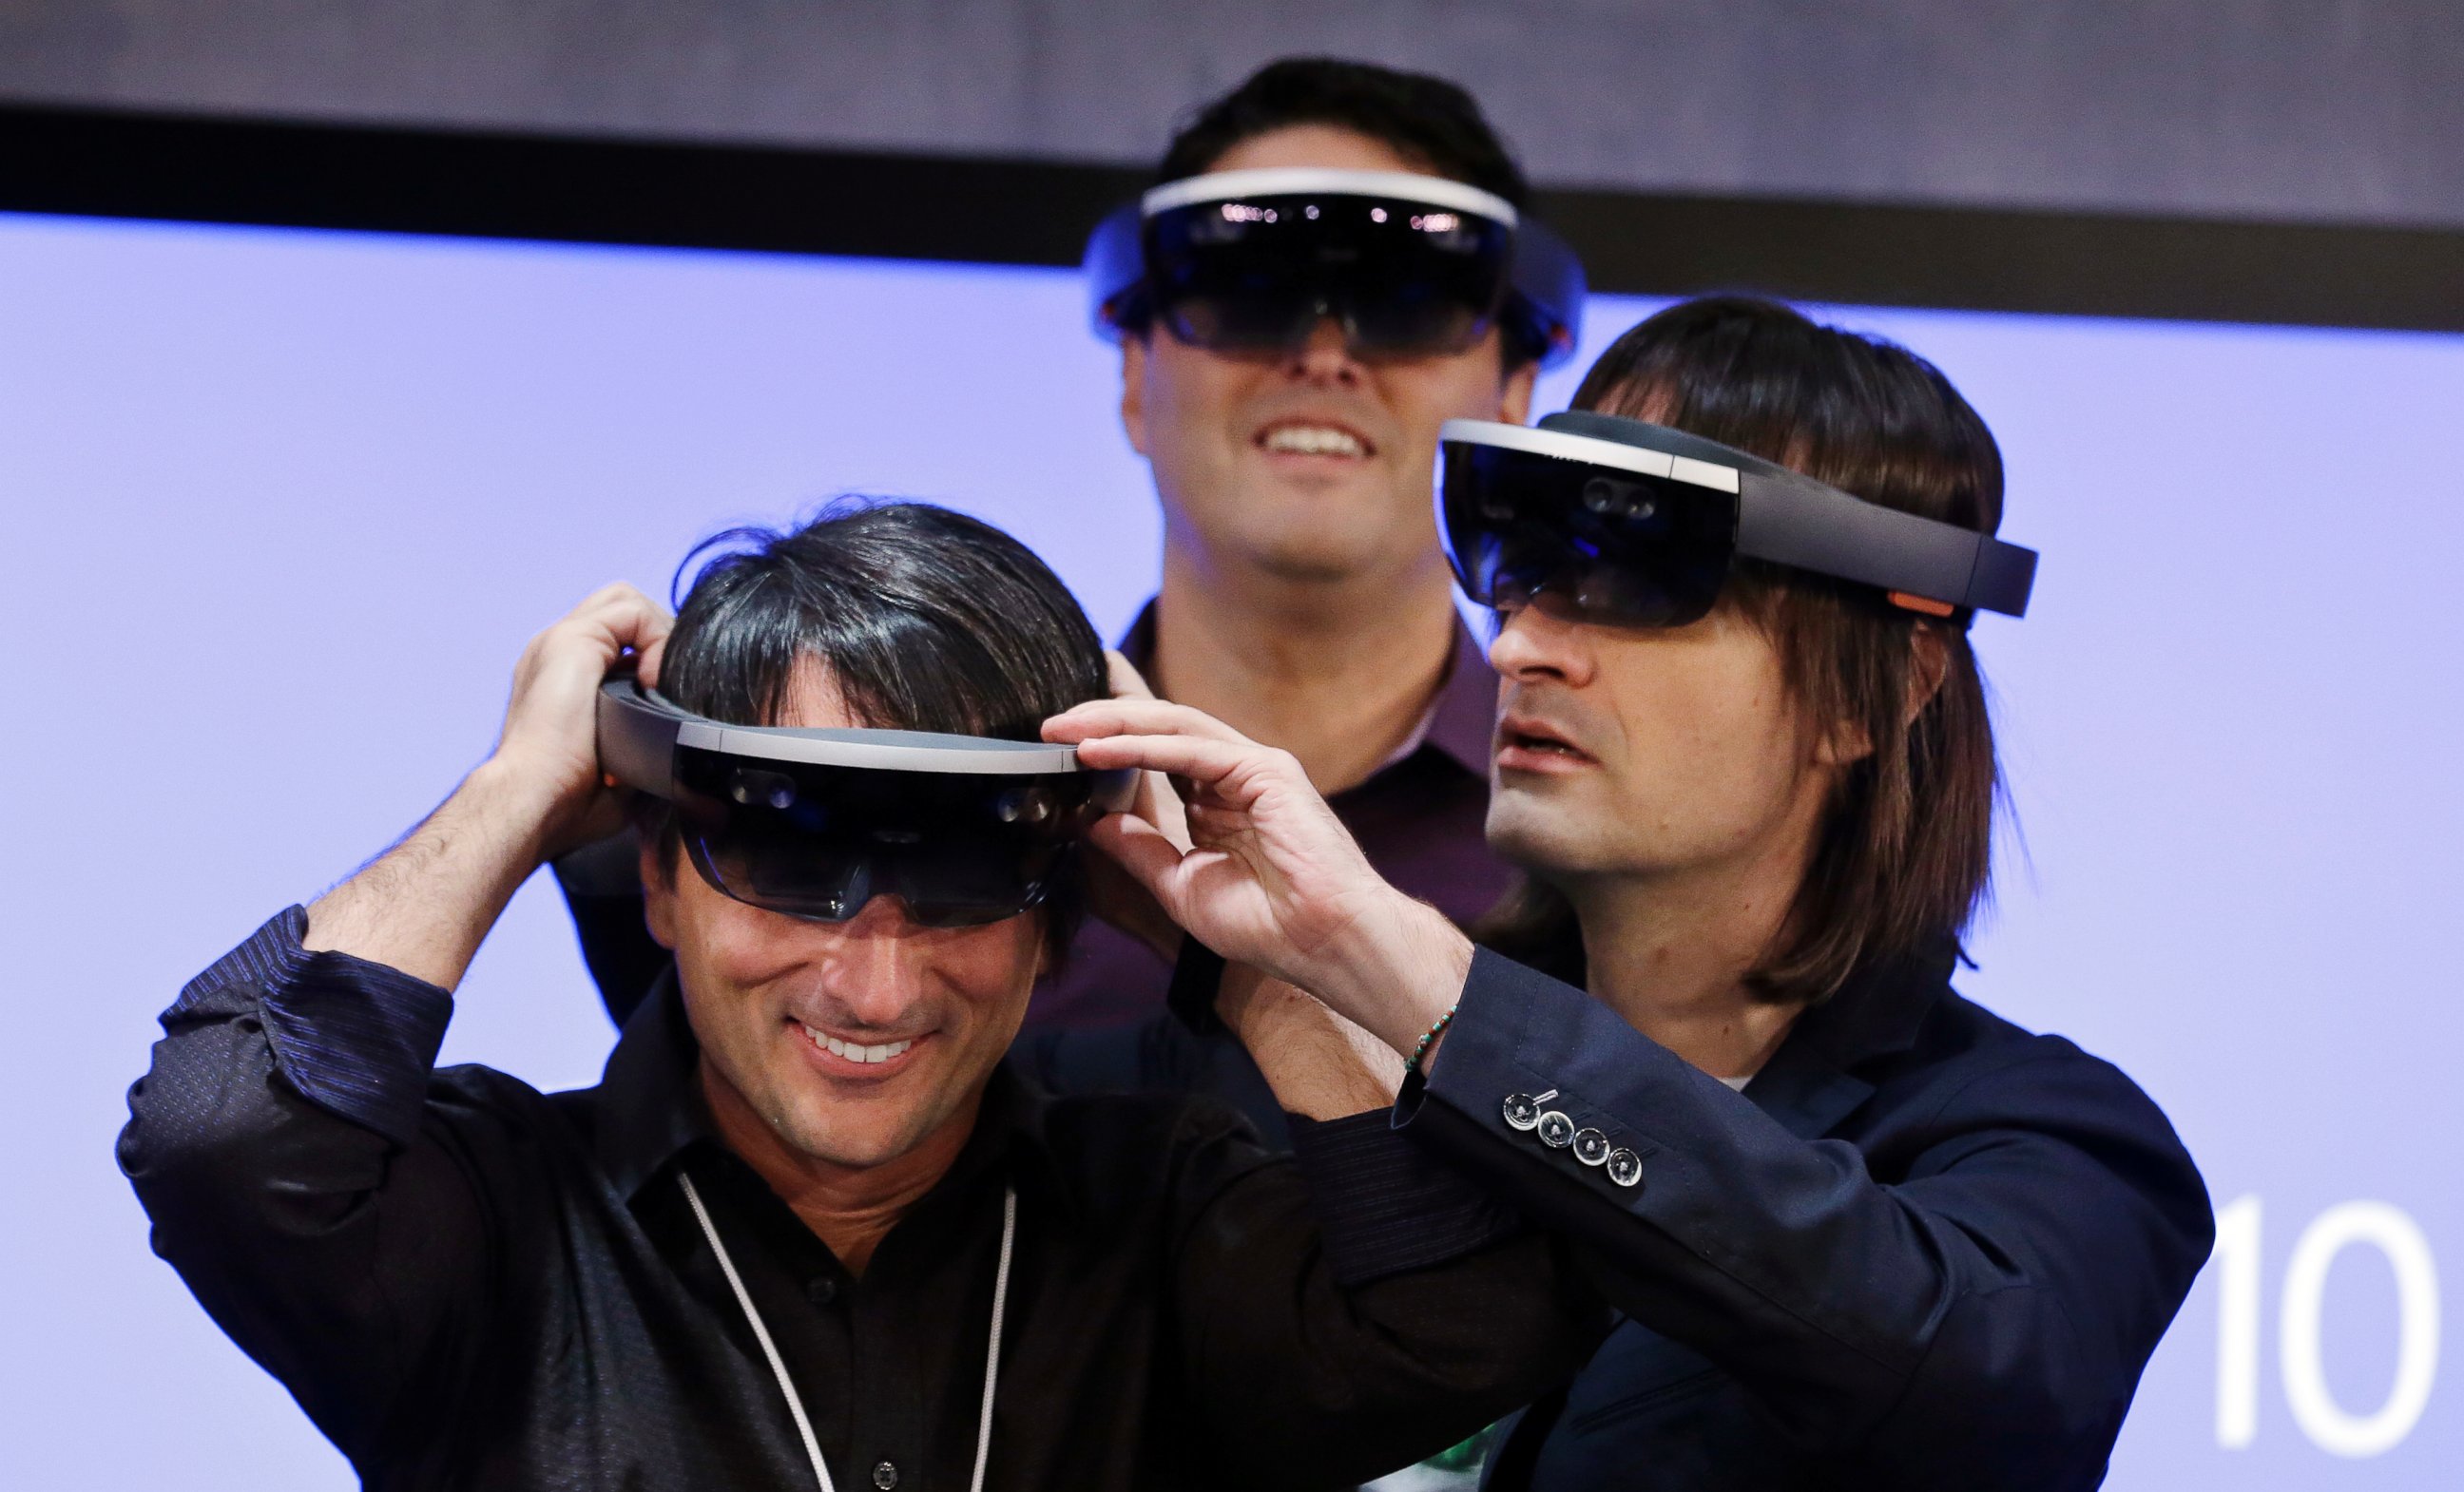 PHOTO: Microsoft's Joe Belfiore (L) smiles as he tries on a "Hololens" device with colleagues Alex Kipman (R) and Terry Myerson following an event demonstrating new features of Windows 10 at the company's headquarters on Jan. 21, 2015, in Redmond, Wash.